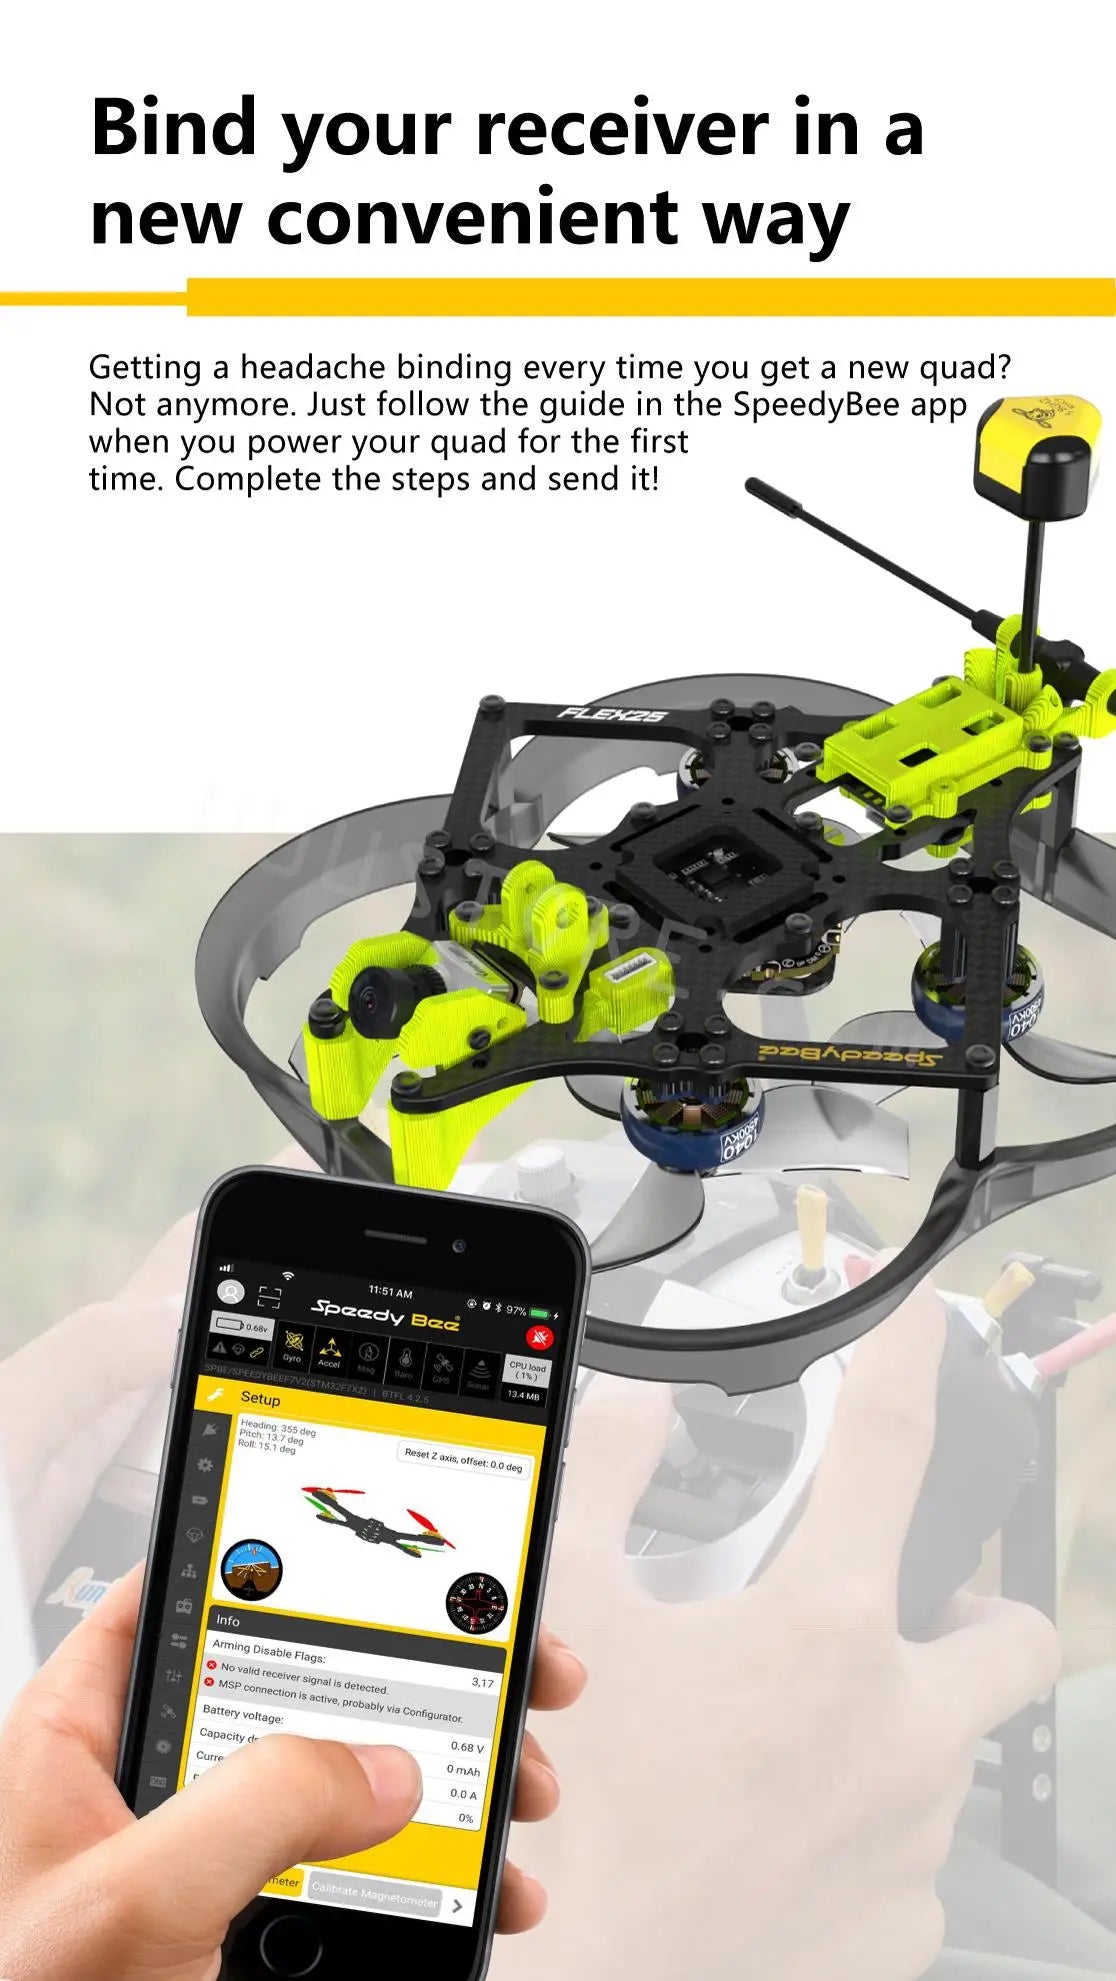 SpeedyBee Flex25 Analog, follow the guide in the SpeedyBee app when you power for the first time: Complete